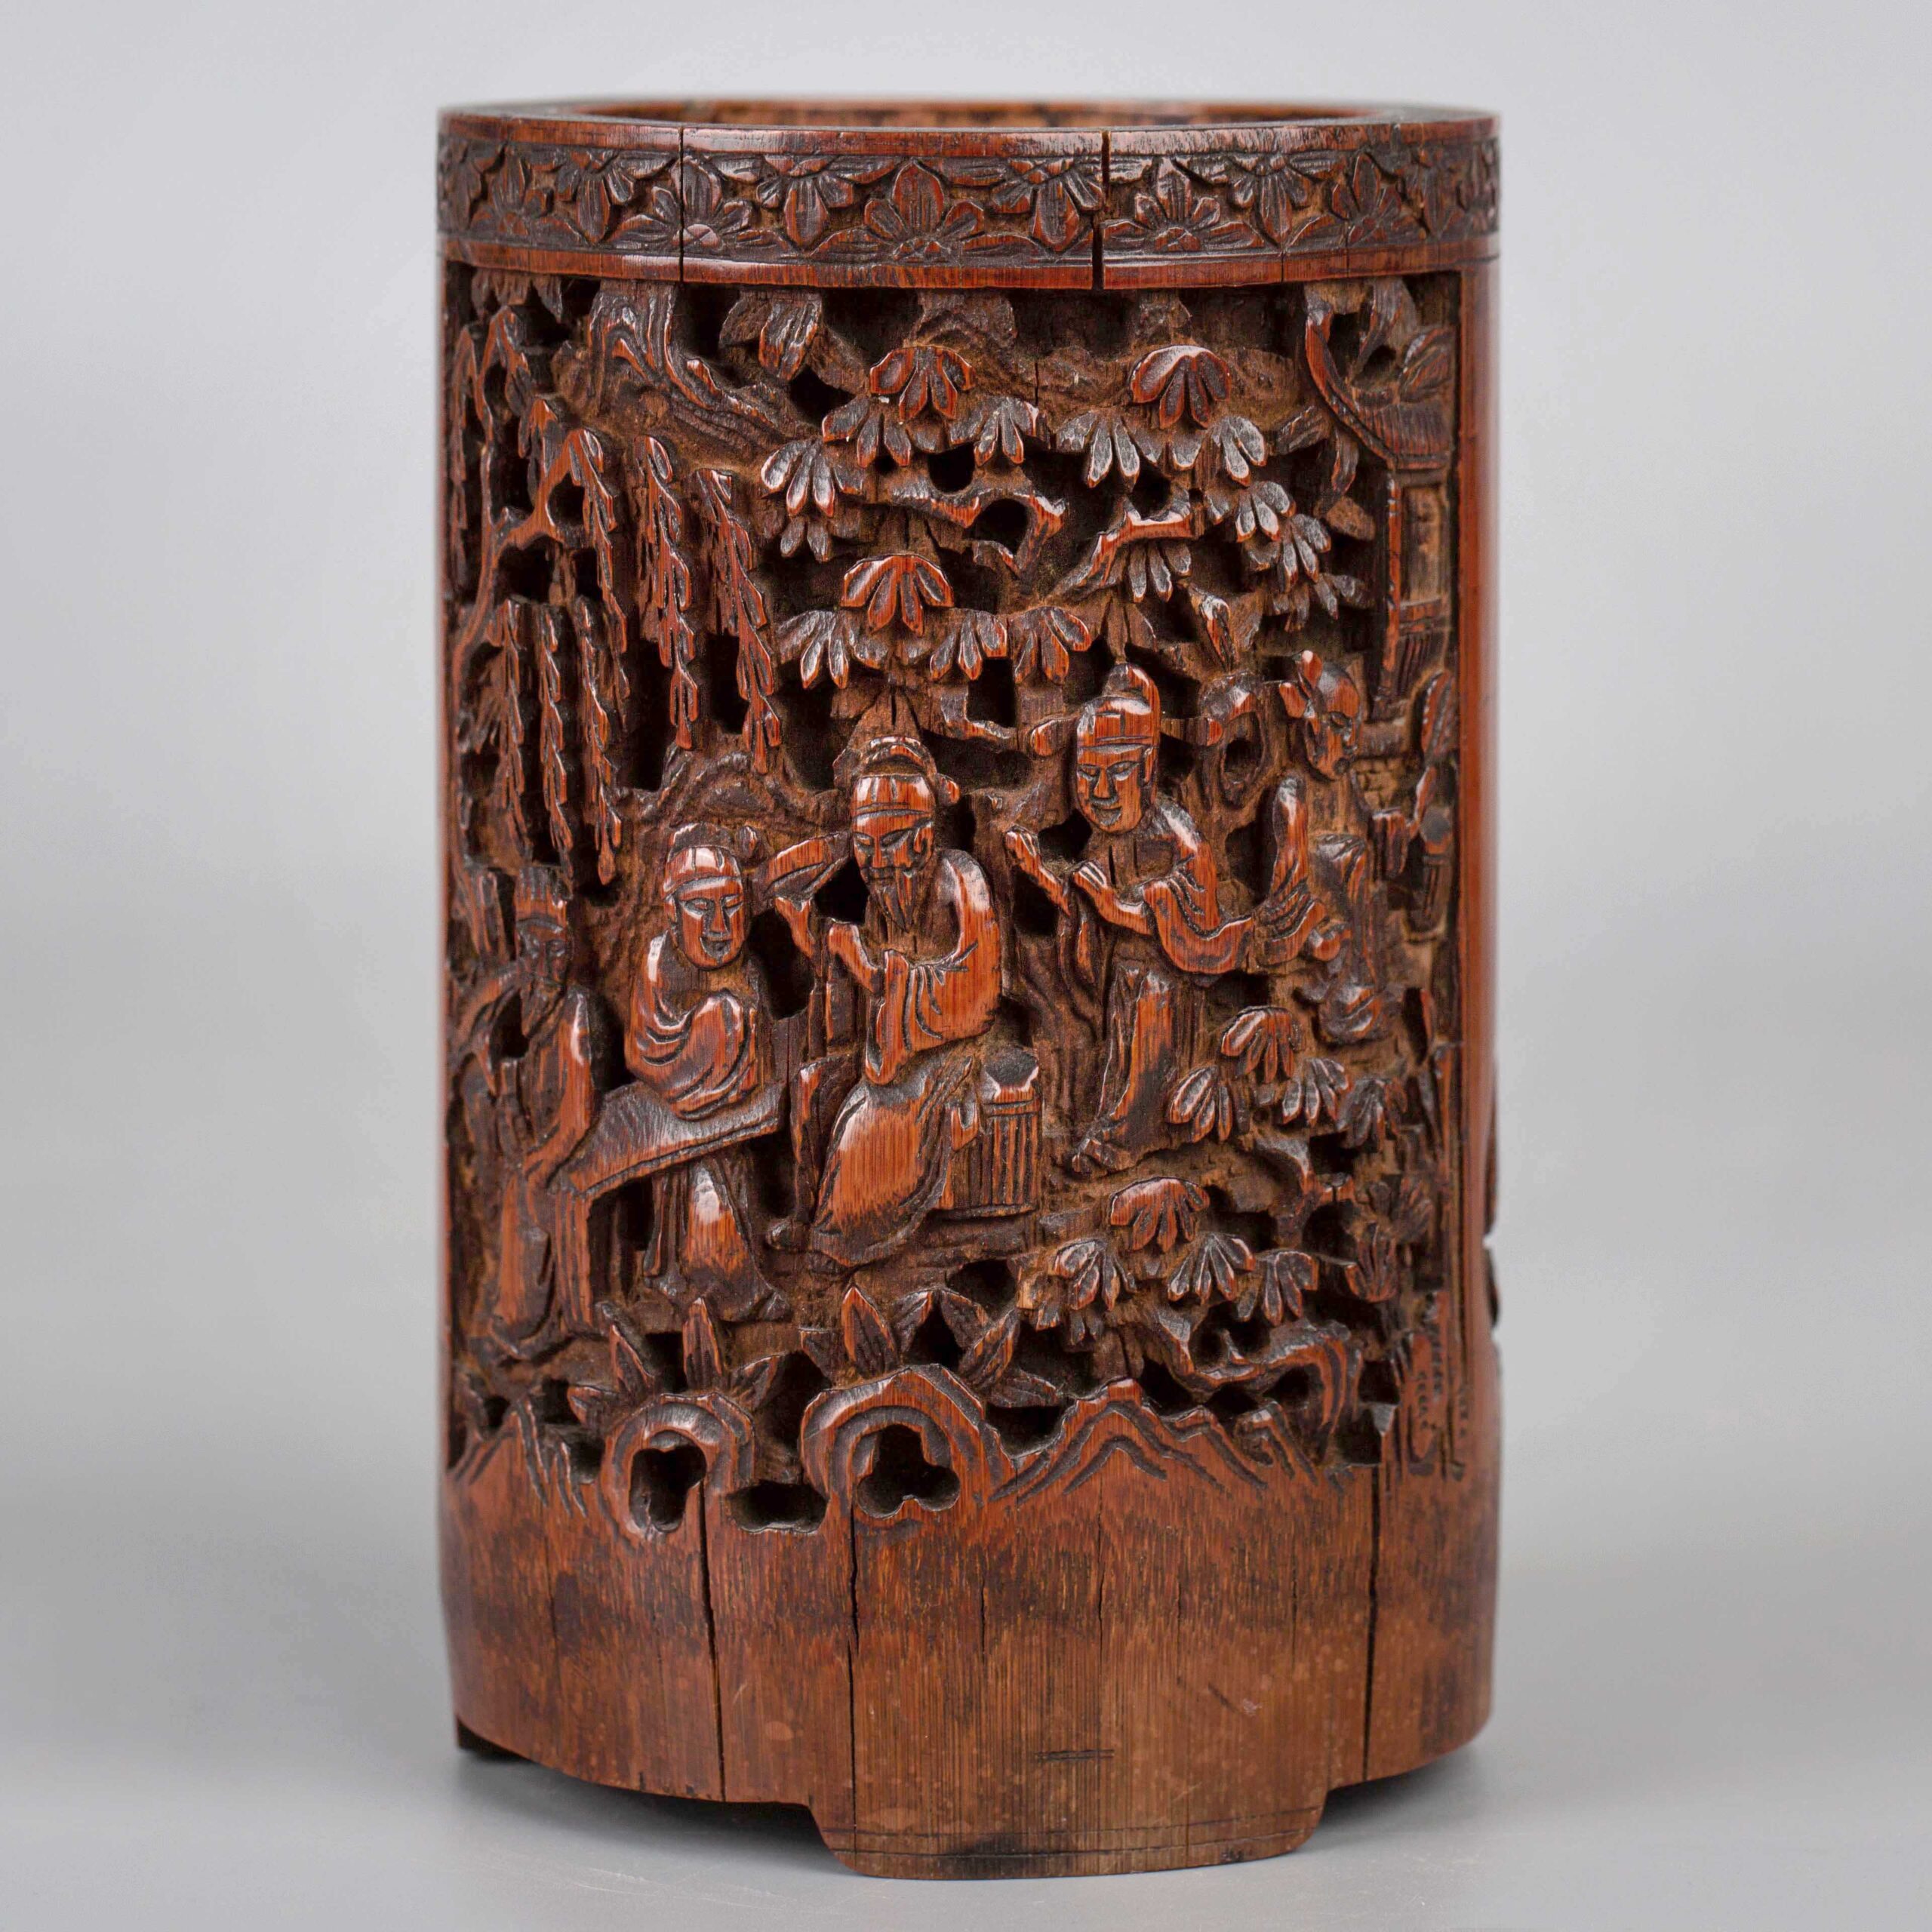 Bamboo brush holder carved phoenix and figures, late Qing dynasty 